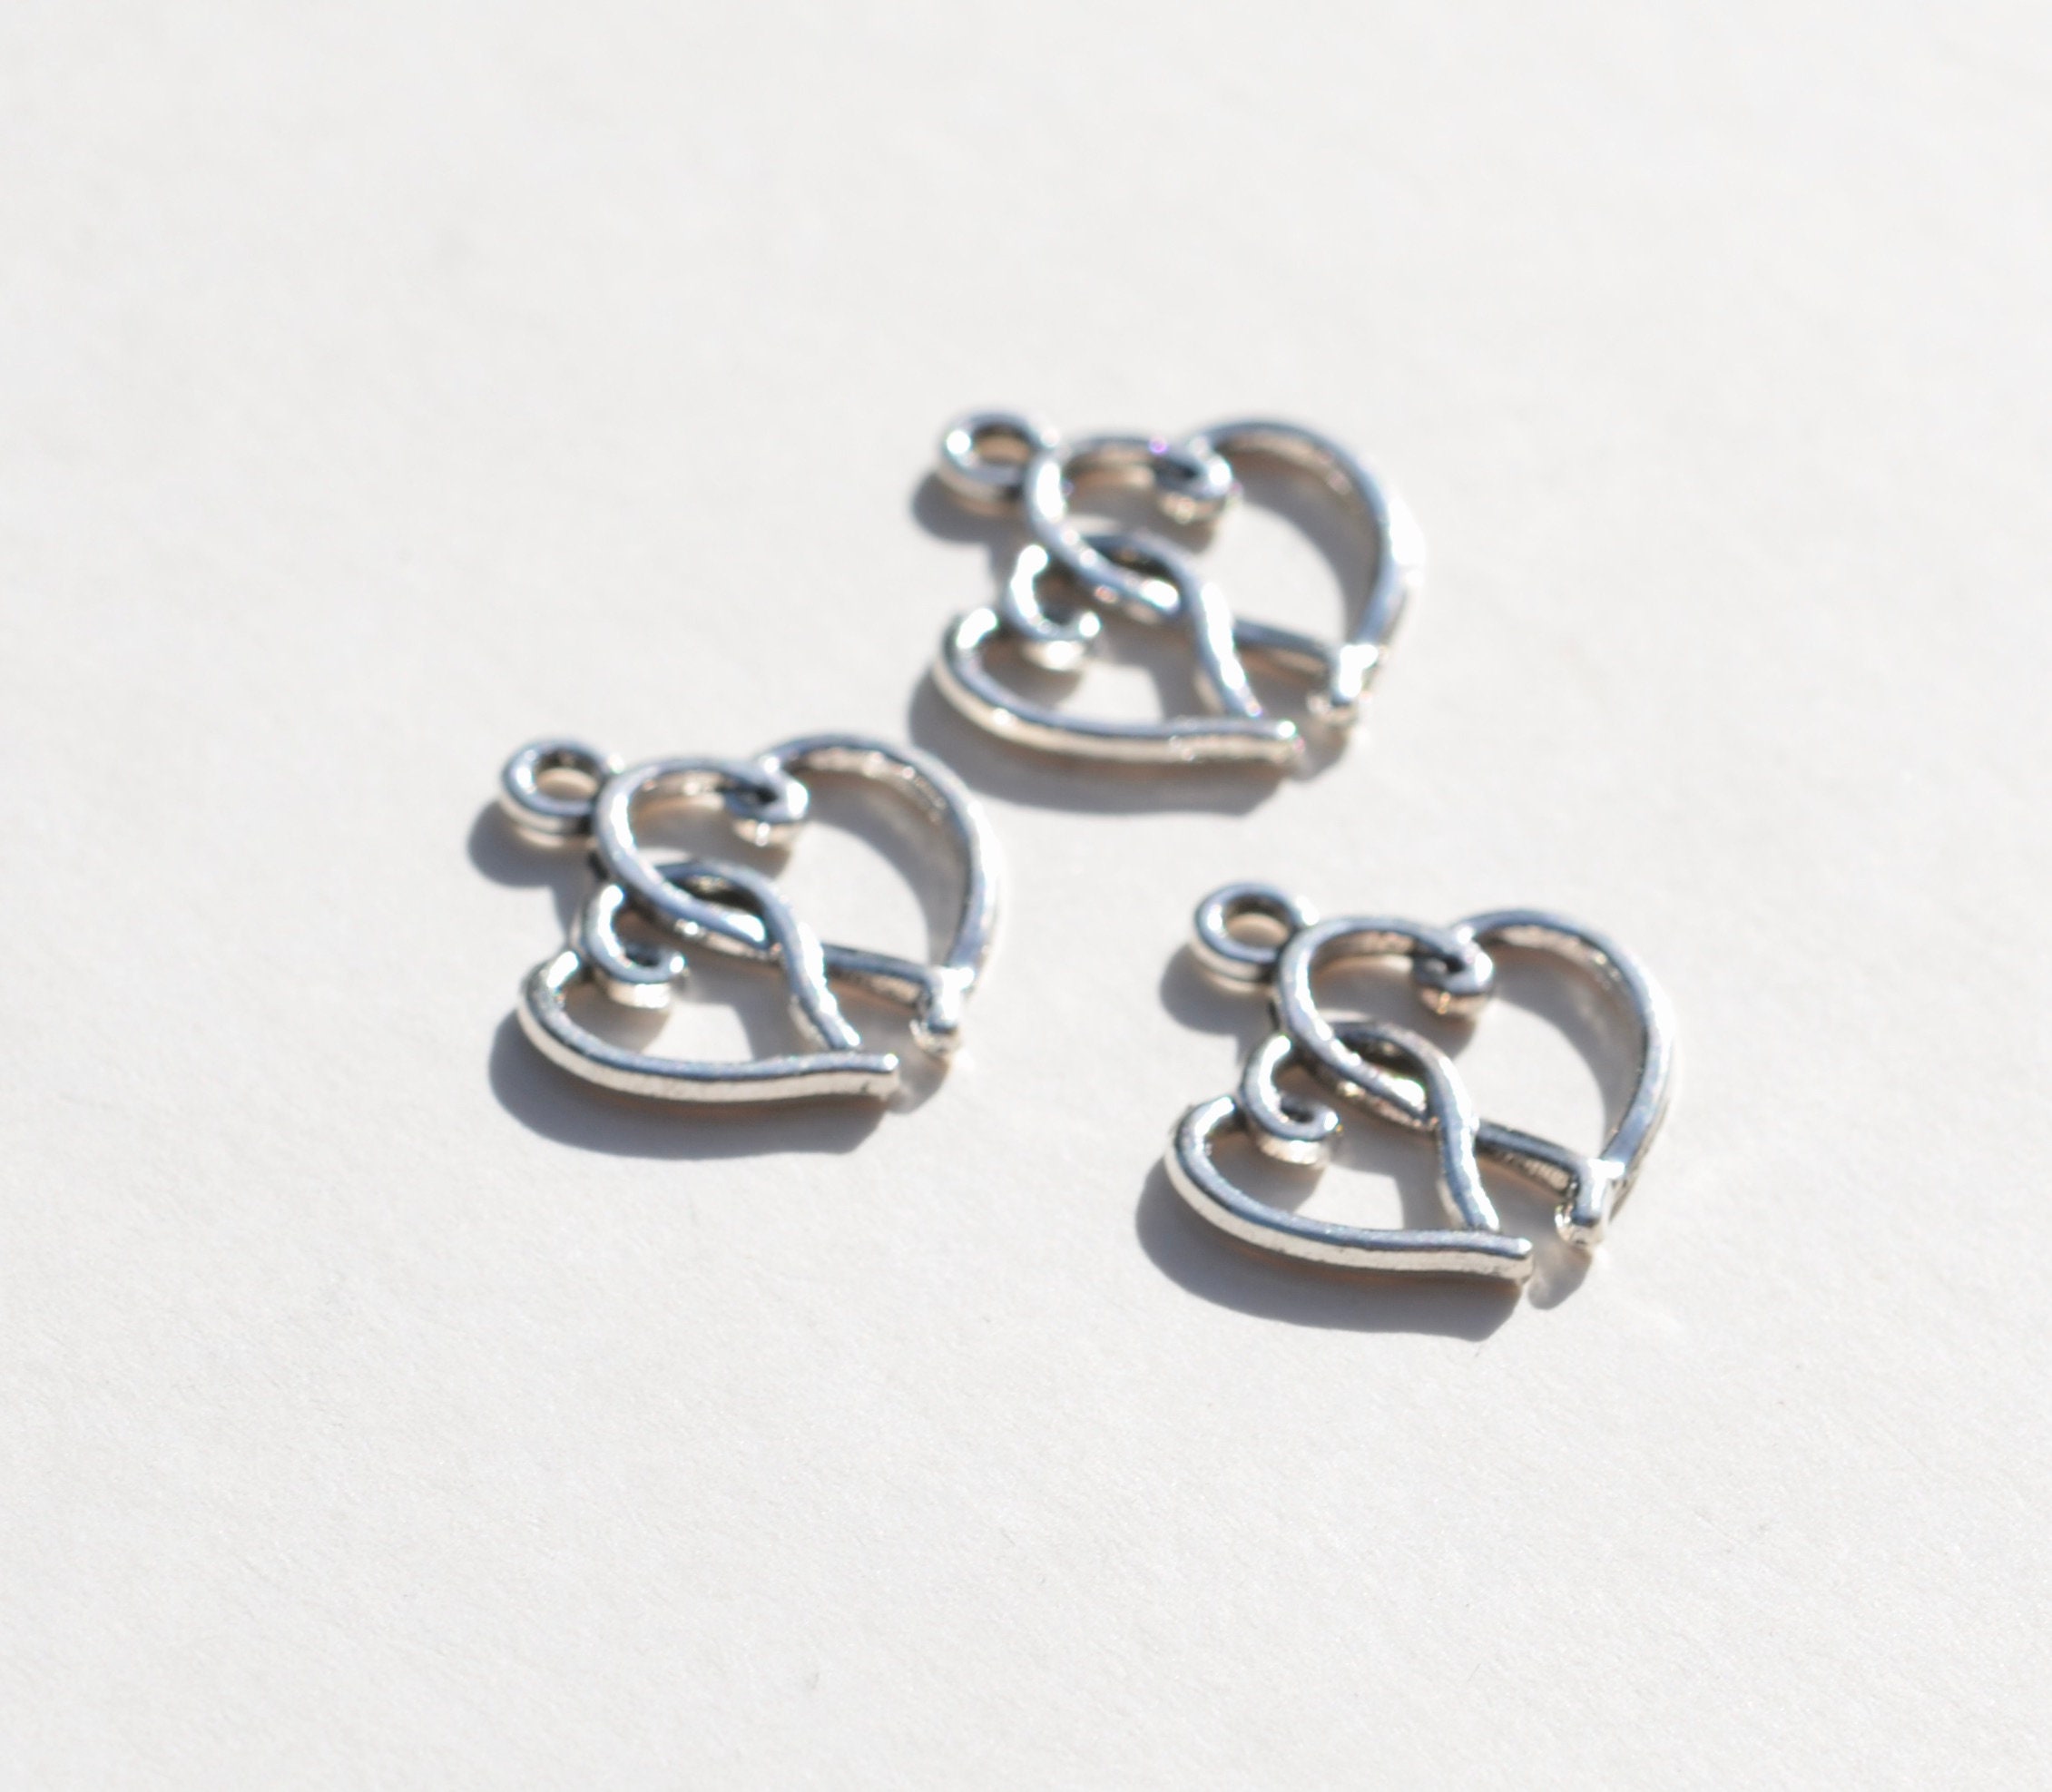 20pcs Flower Heart Charms Valentine Charms Double Sided Charms Antique Silver Tone 18x18mm cf1659